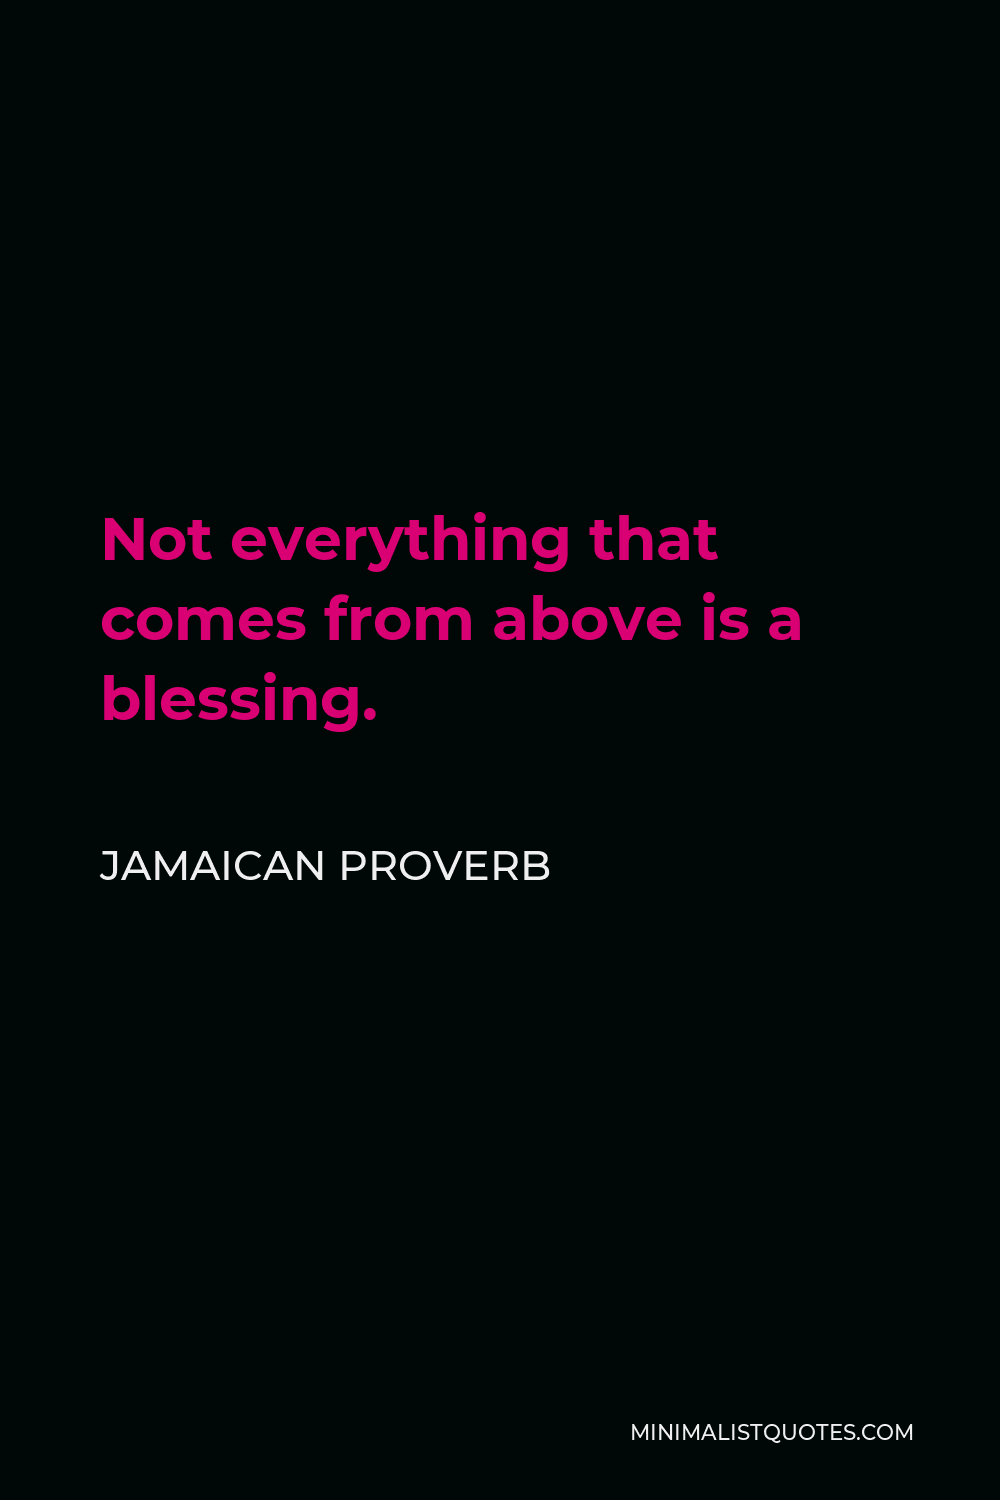 Jamaican Proverb Quote - Not everything that comes from above is a blessing.